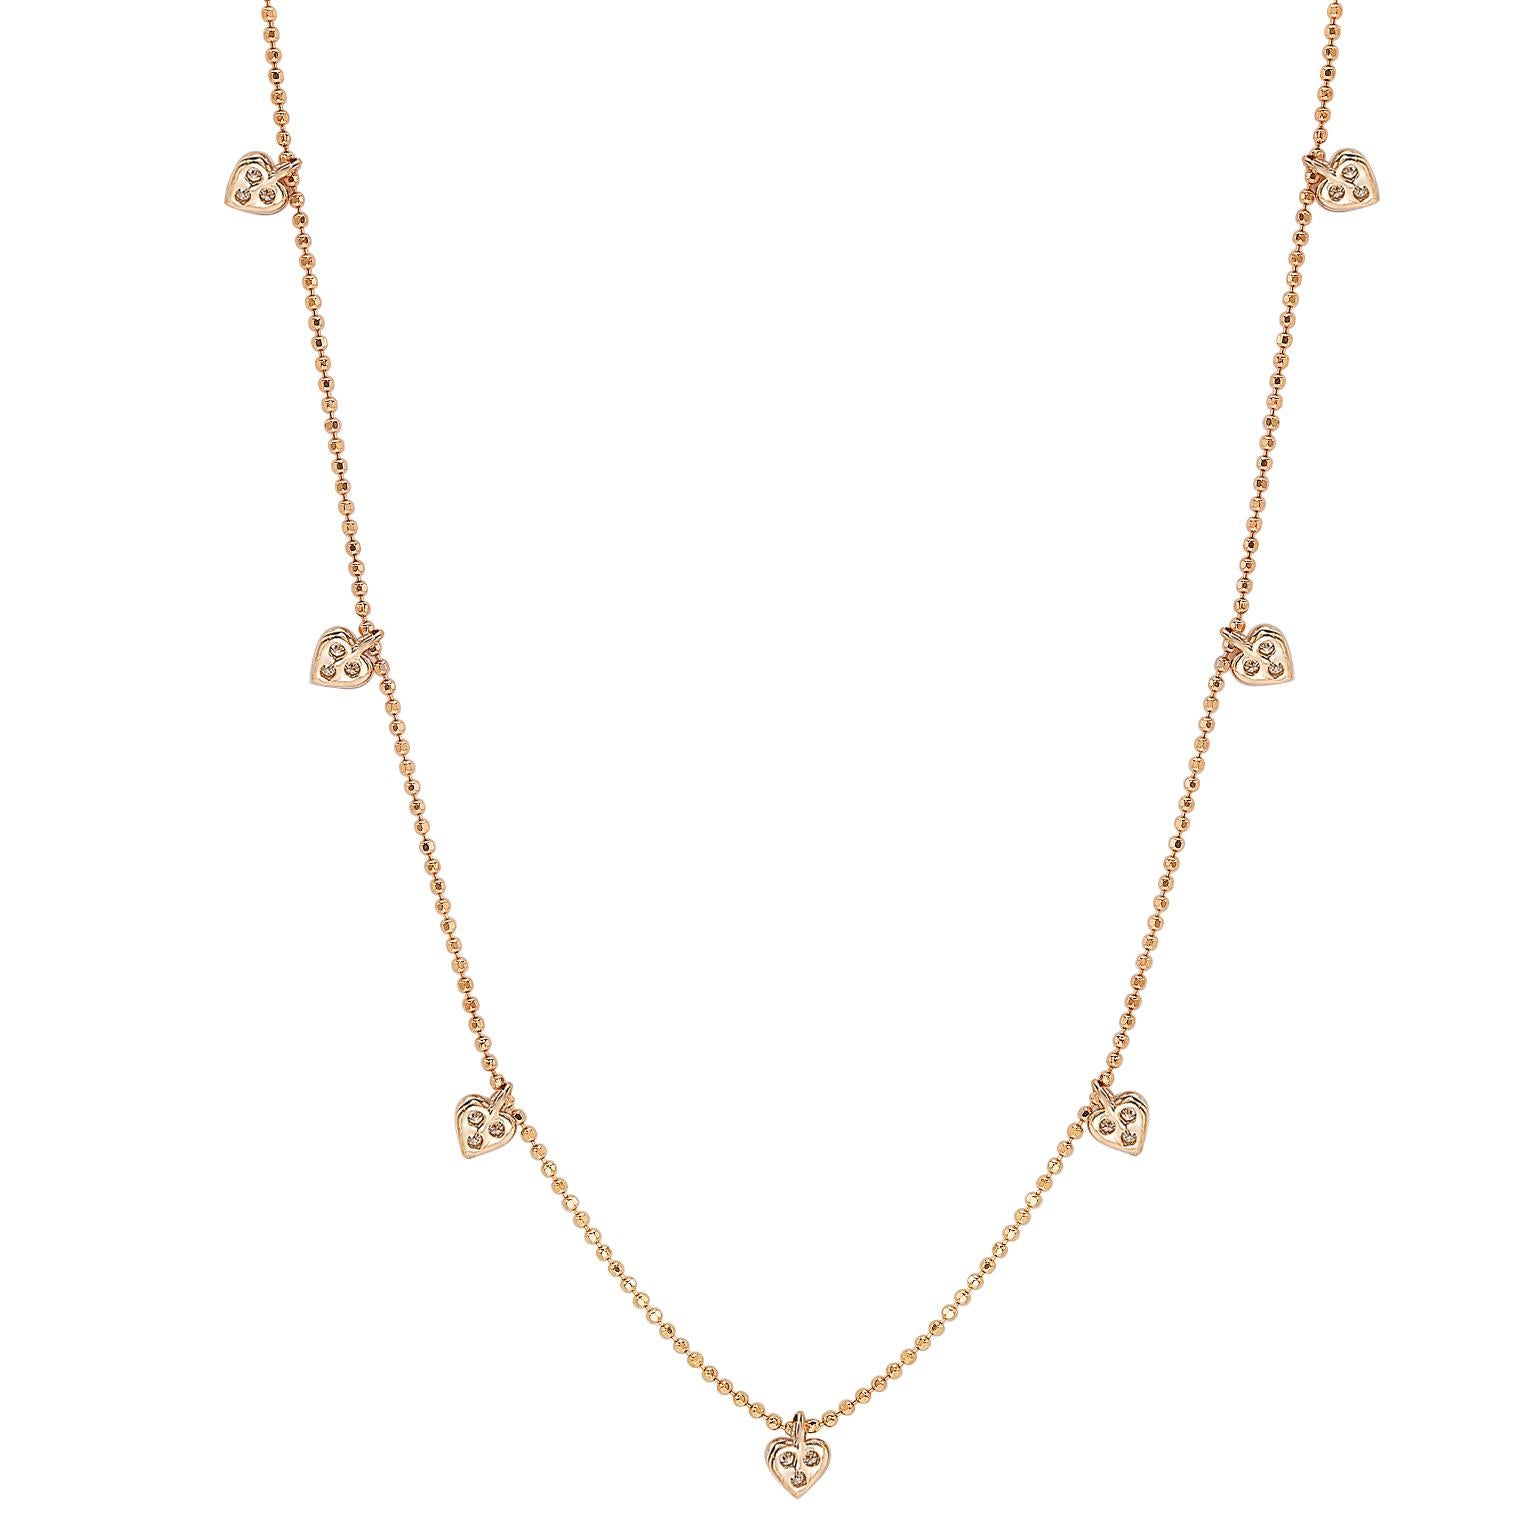 This unique Suzy Levian diamond station heart necklace displays round-cut diamonds on 14 karat rose gold setting. This gorgeous necklace contains 21 white round cut diamonds totaling .26cttw. The necklace has 7 hearts, each heart contains 3 diamond